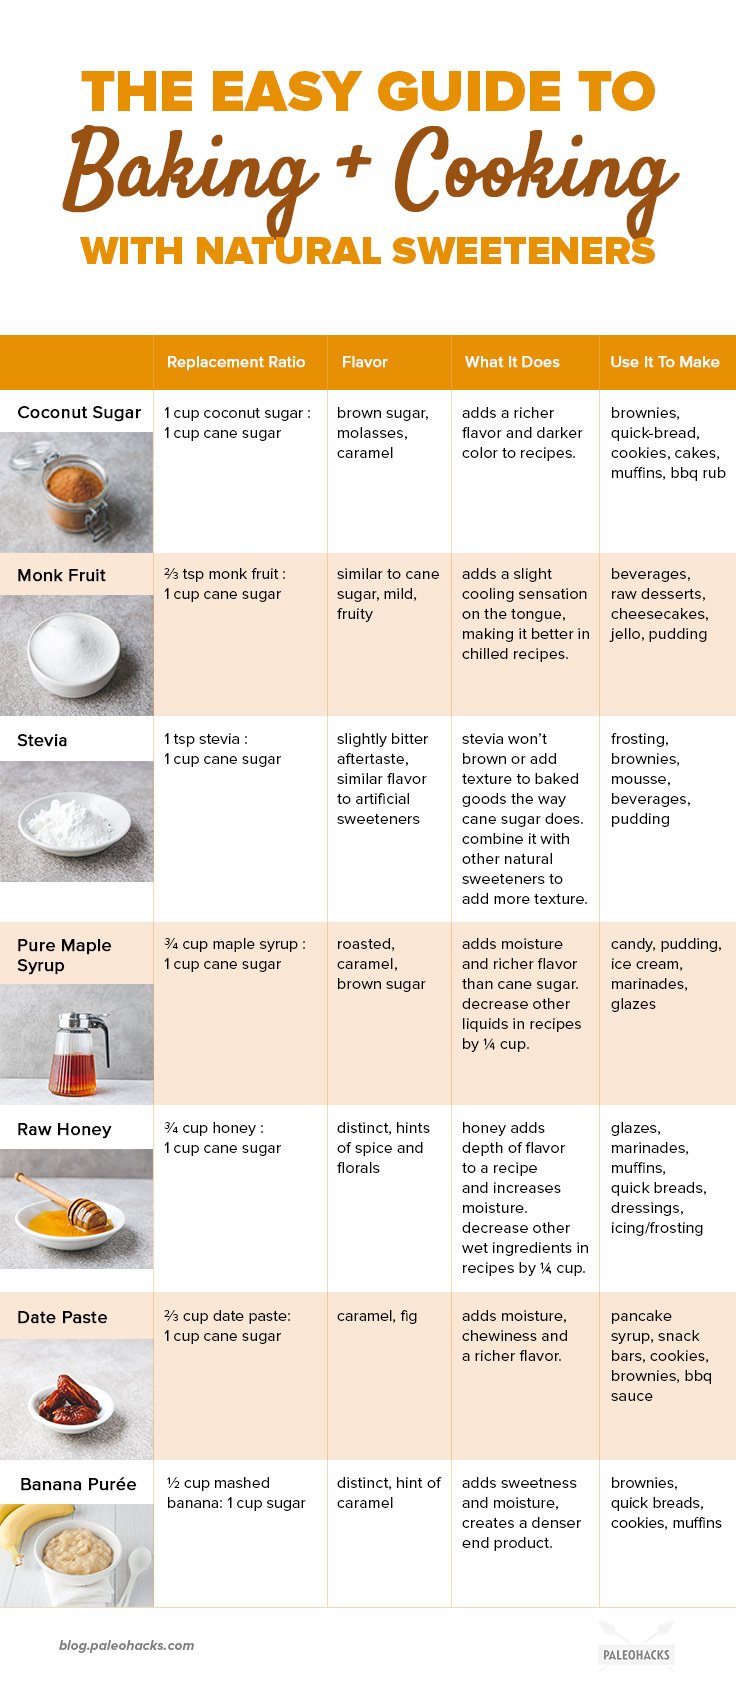 Don’t sacrifice your favorite sweets and desserts! Use this Paleo Sweeteners Guide to satisfy all your indulgences - without the sugar crash.